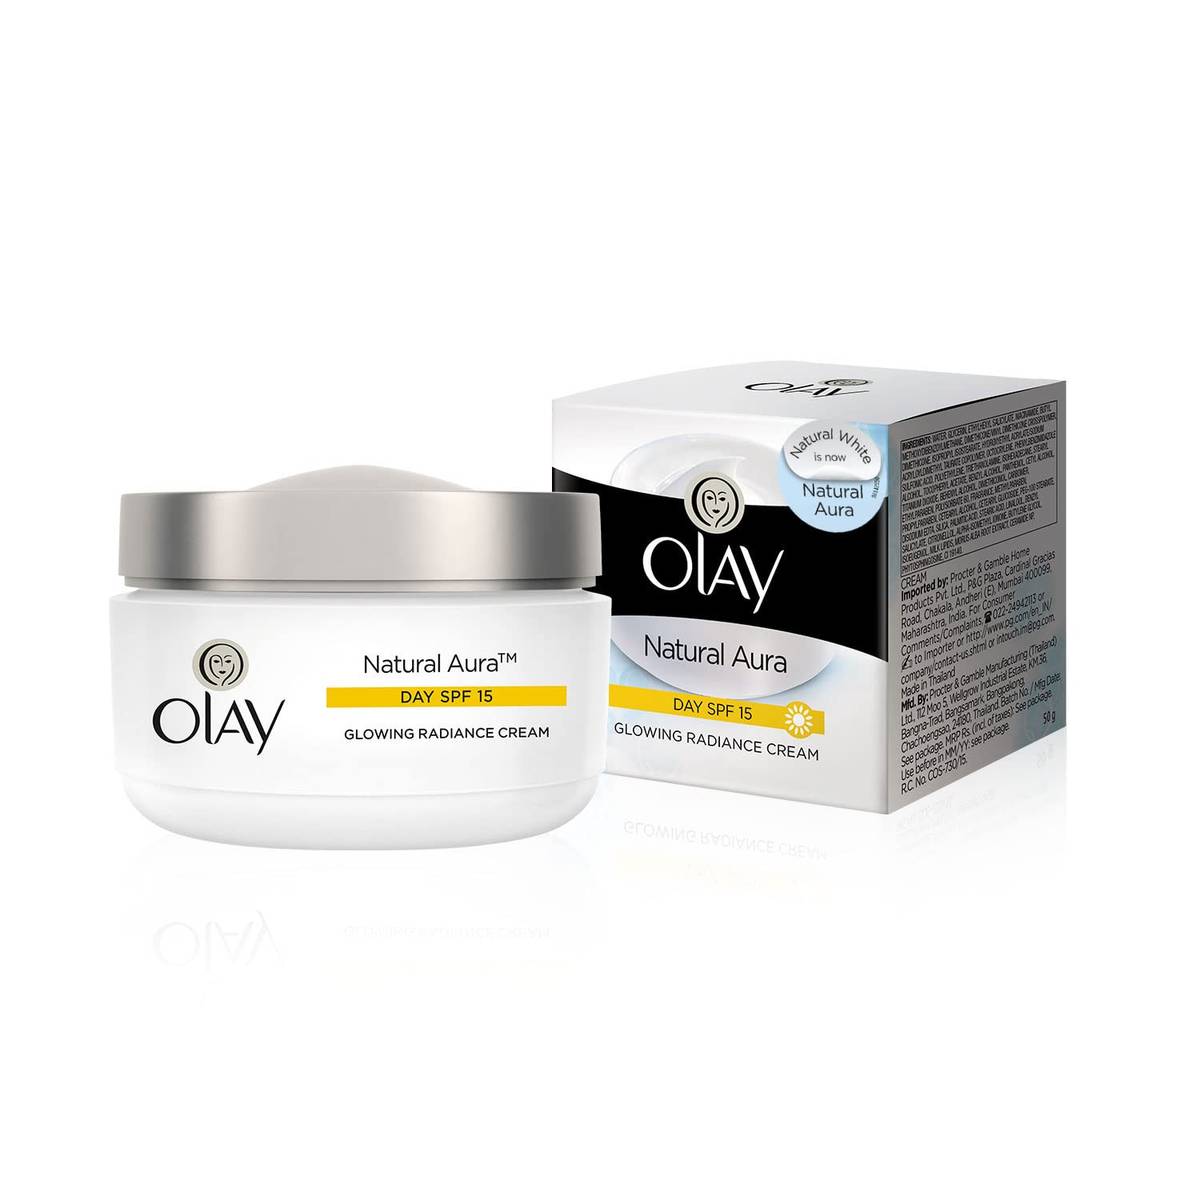 Olay Natural Aura Glowing Radiance Cream(Day SPF15)50G